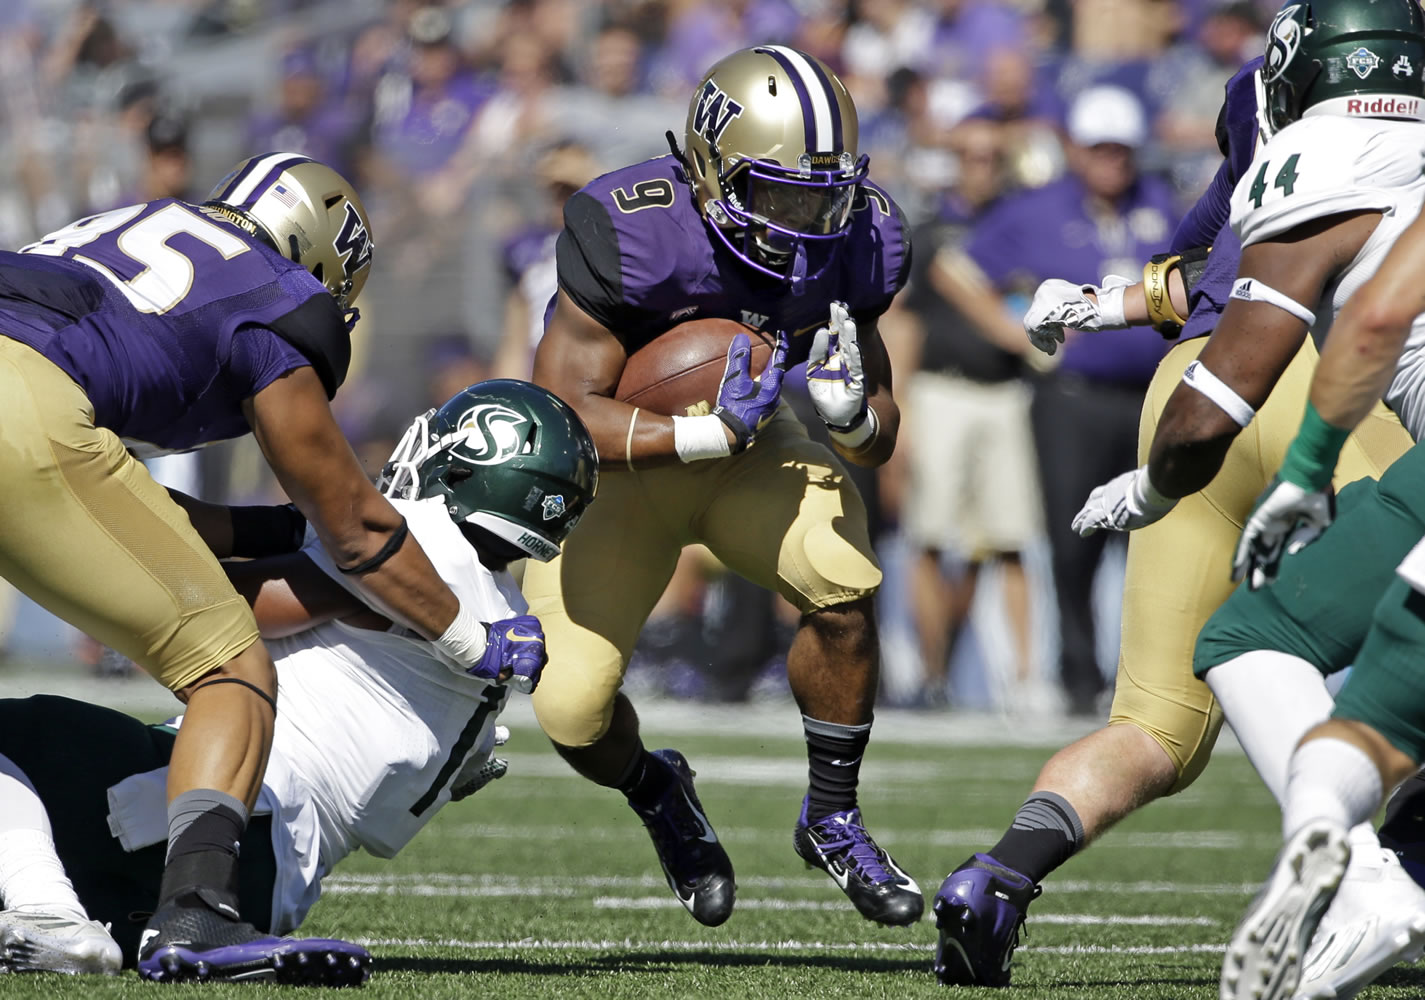 Washington's Myles Gaskin (9) tries to break through a hole on a run against Sacramento State in the first half of an NCAA college football game Saturday, Sept. 12, 2015, in Seattle.